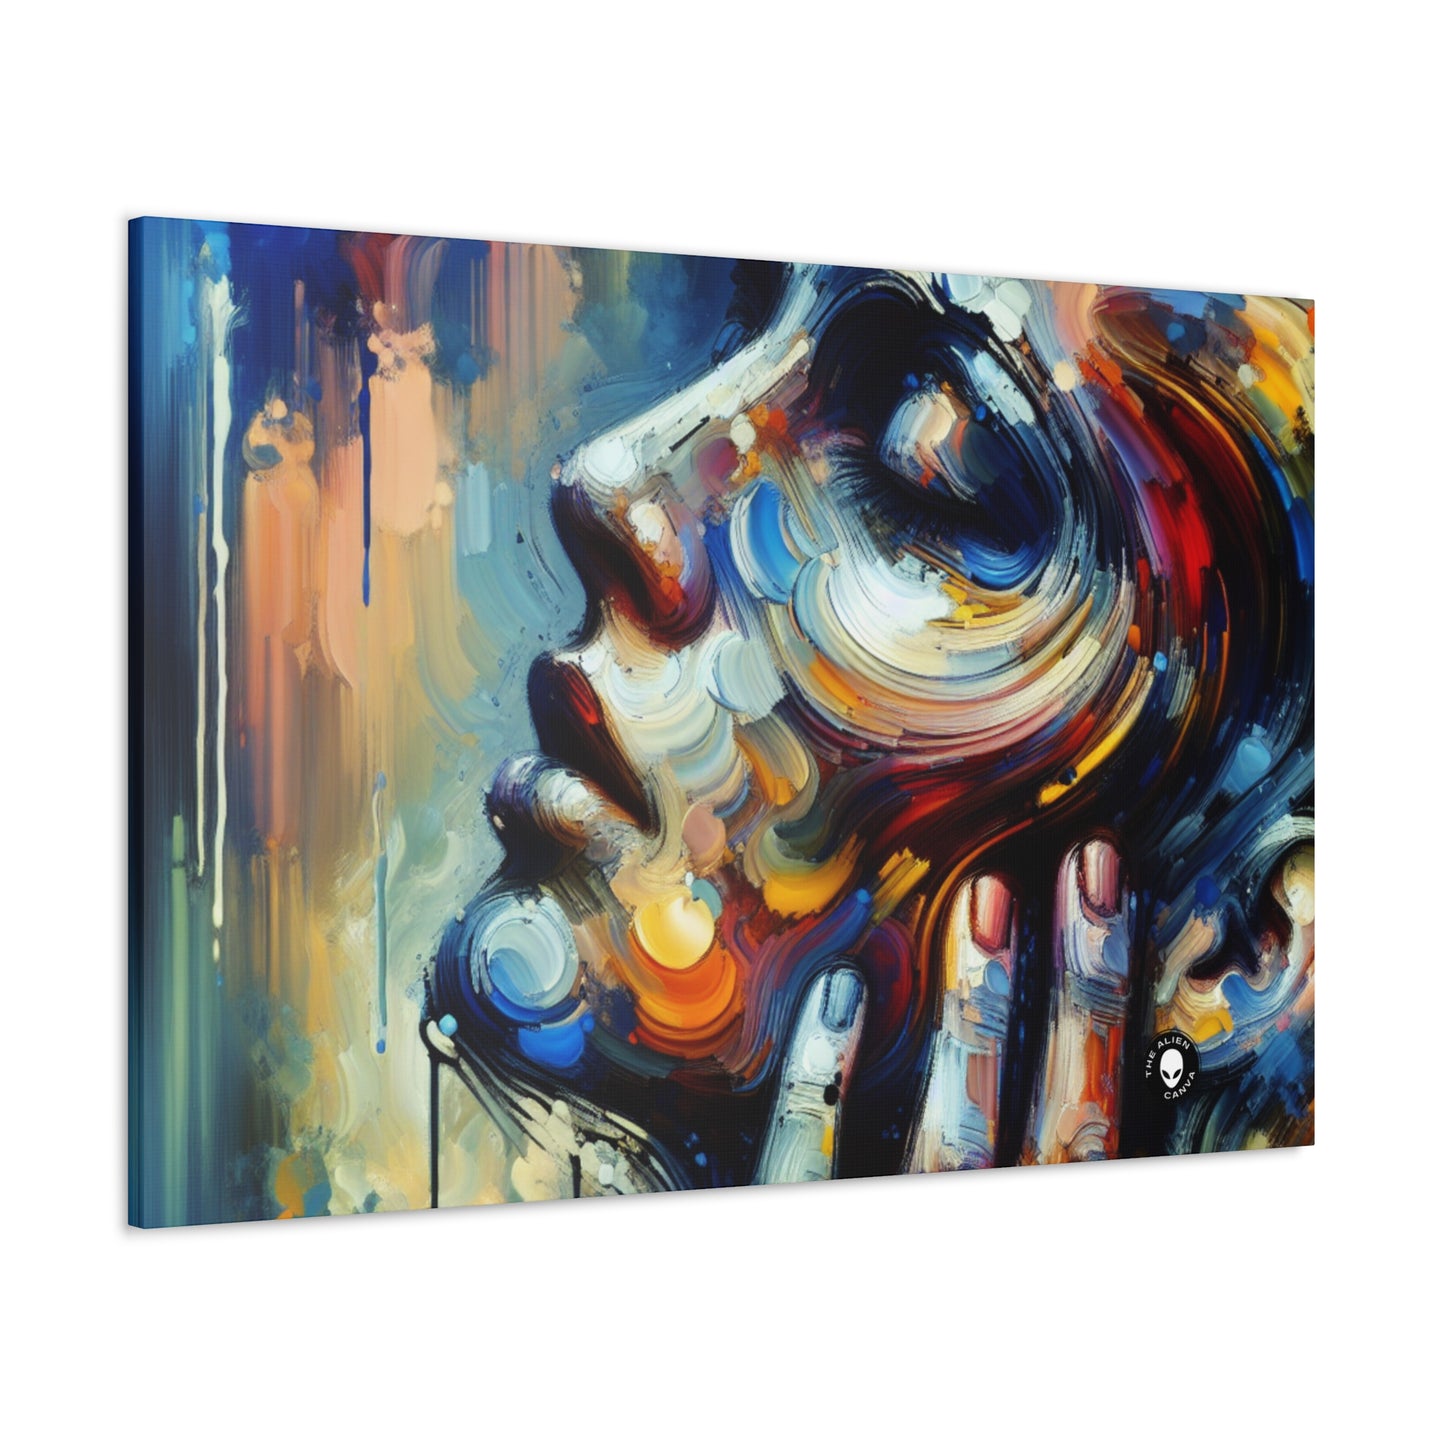 "City Lights: A Neo-Expressionist Ode to Urban Chaos" - The Alien Canva Neo-Expressionism